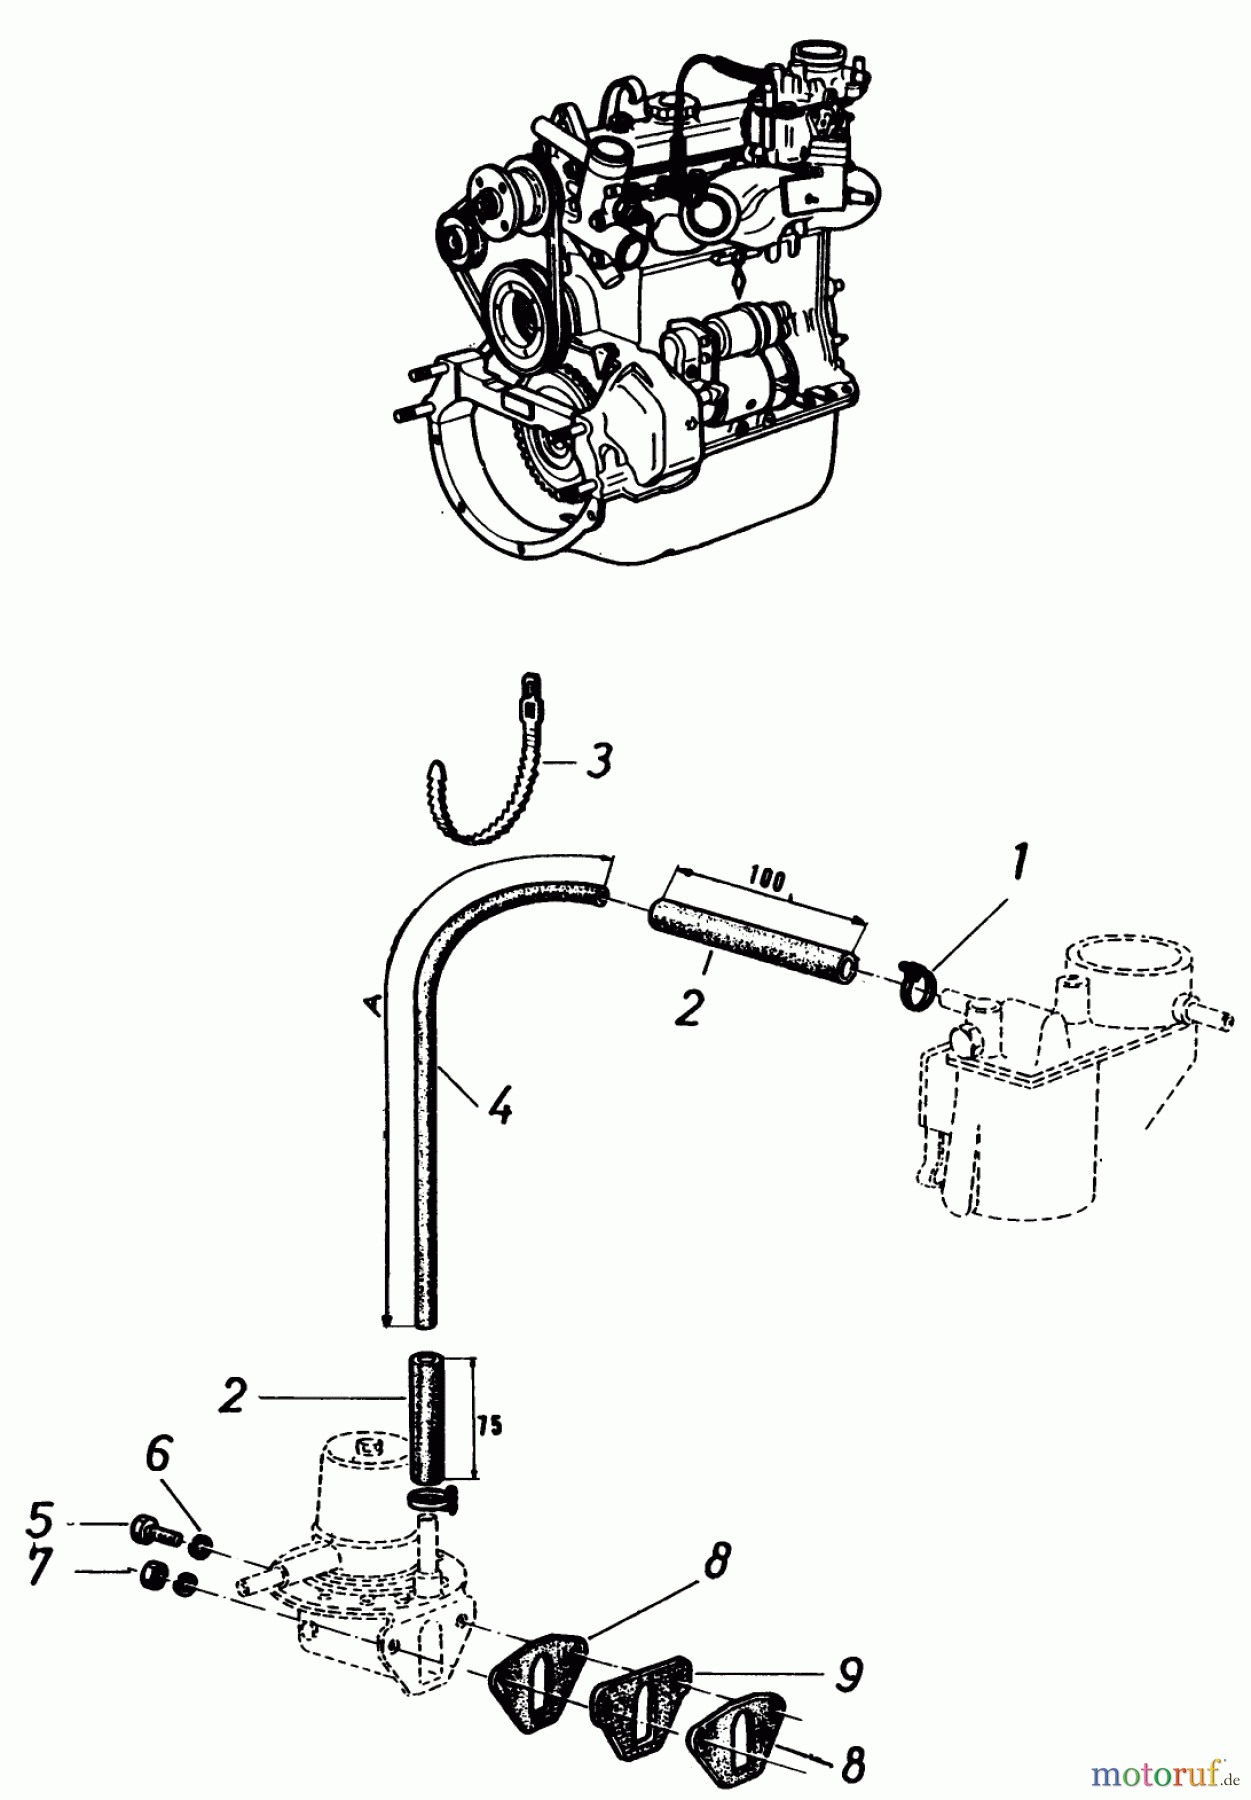  Toro Neu Mowers, Lawn & Garden Tractor Seite 2 91-20RG01 (D-250) - Toro D-250 10-Speed Tractor, 1980 ENGINE FUEL LINES AND FUEL PUMP MOUNTING HARDWARE